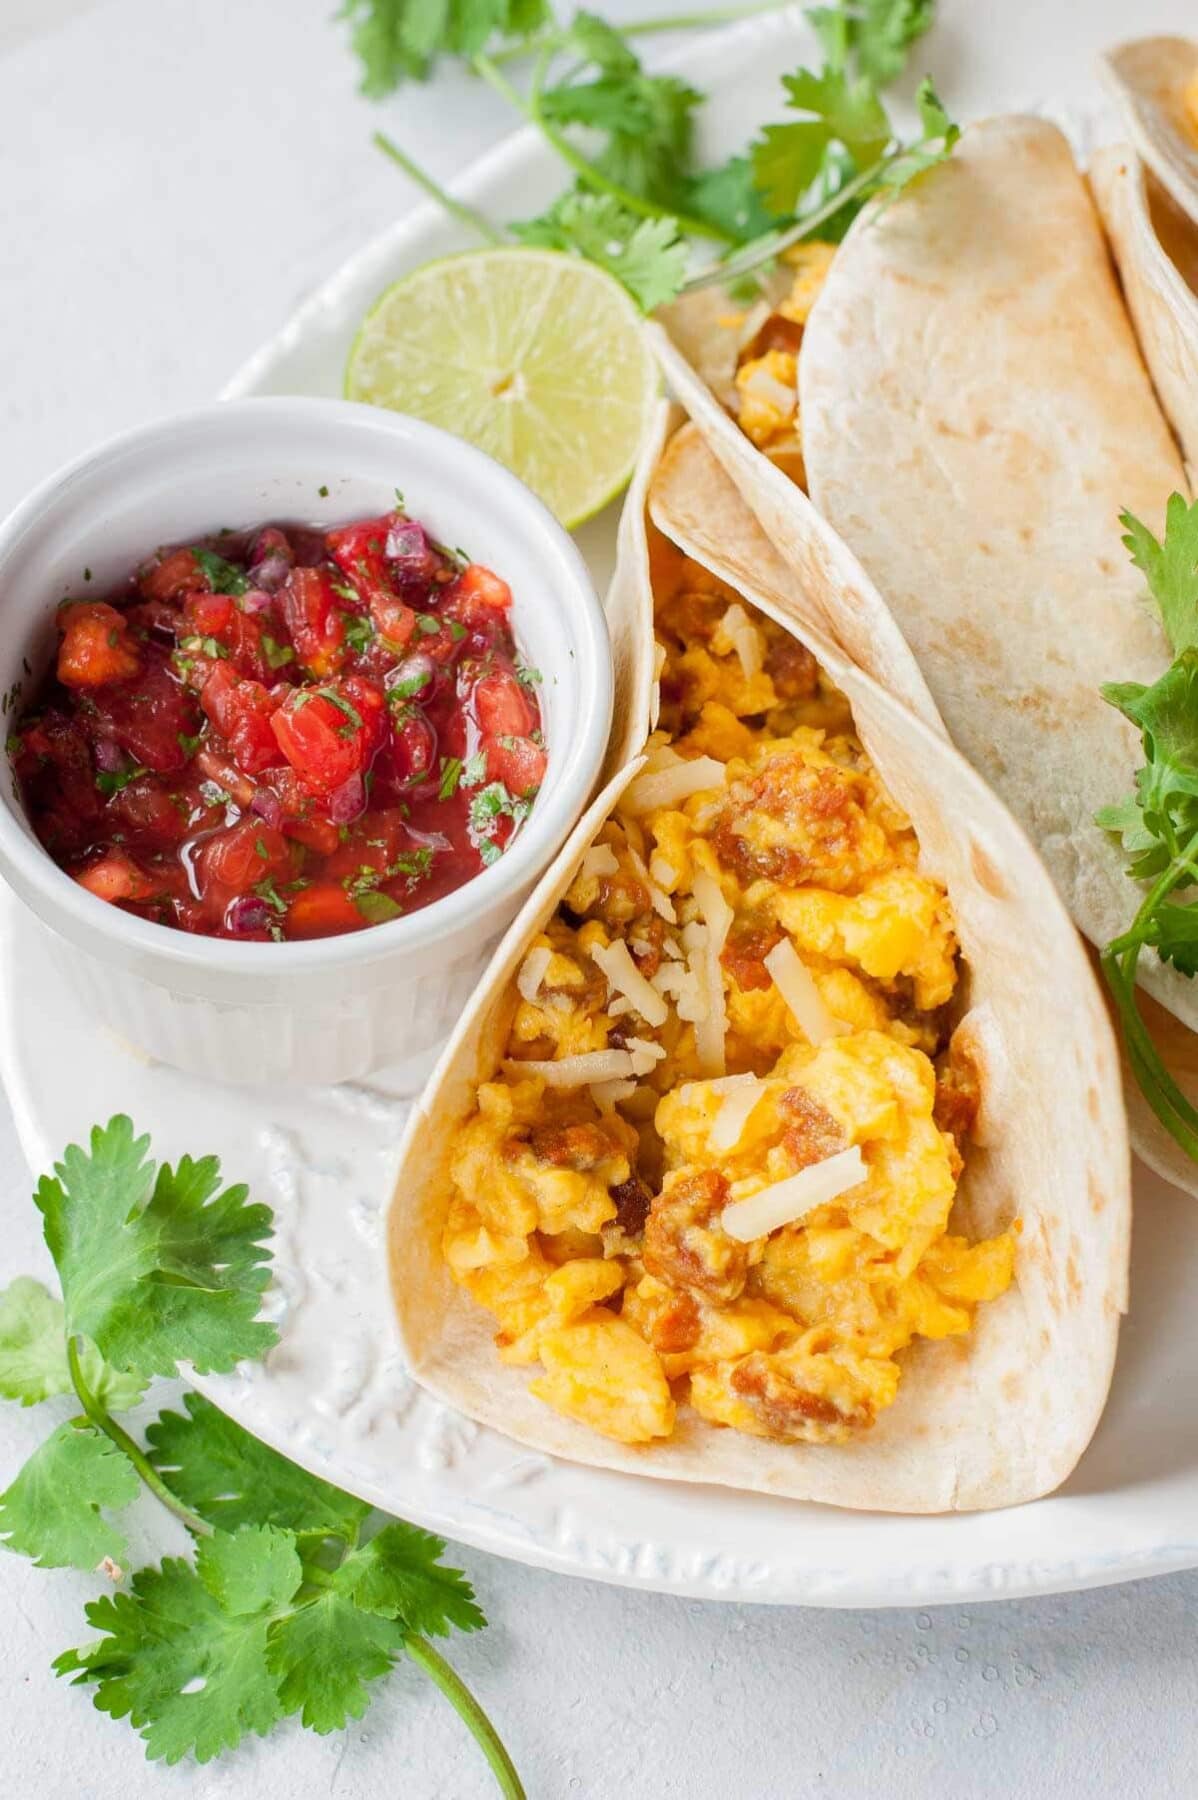 Tacos with scrambled eggs and chorizo, small bowl with pico de gallo on the side.